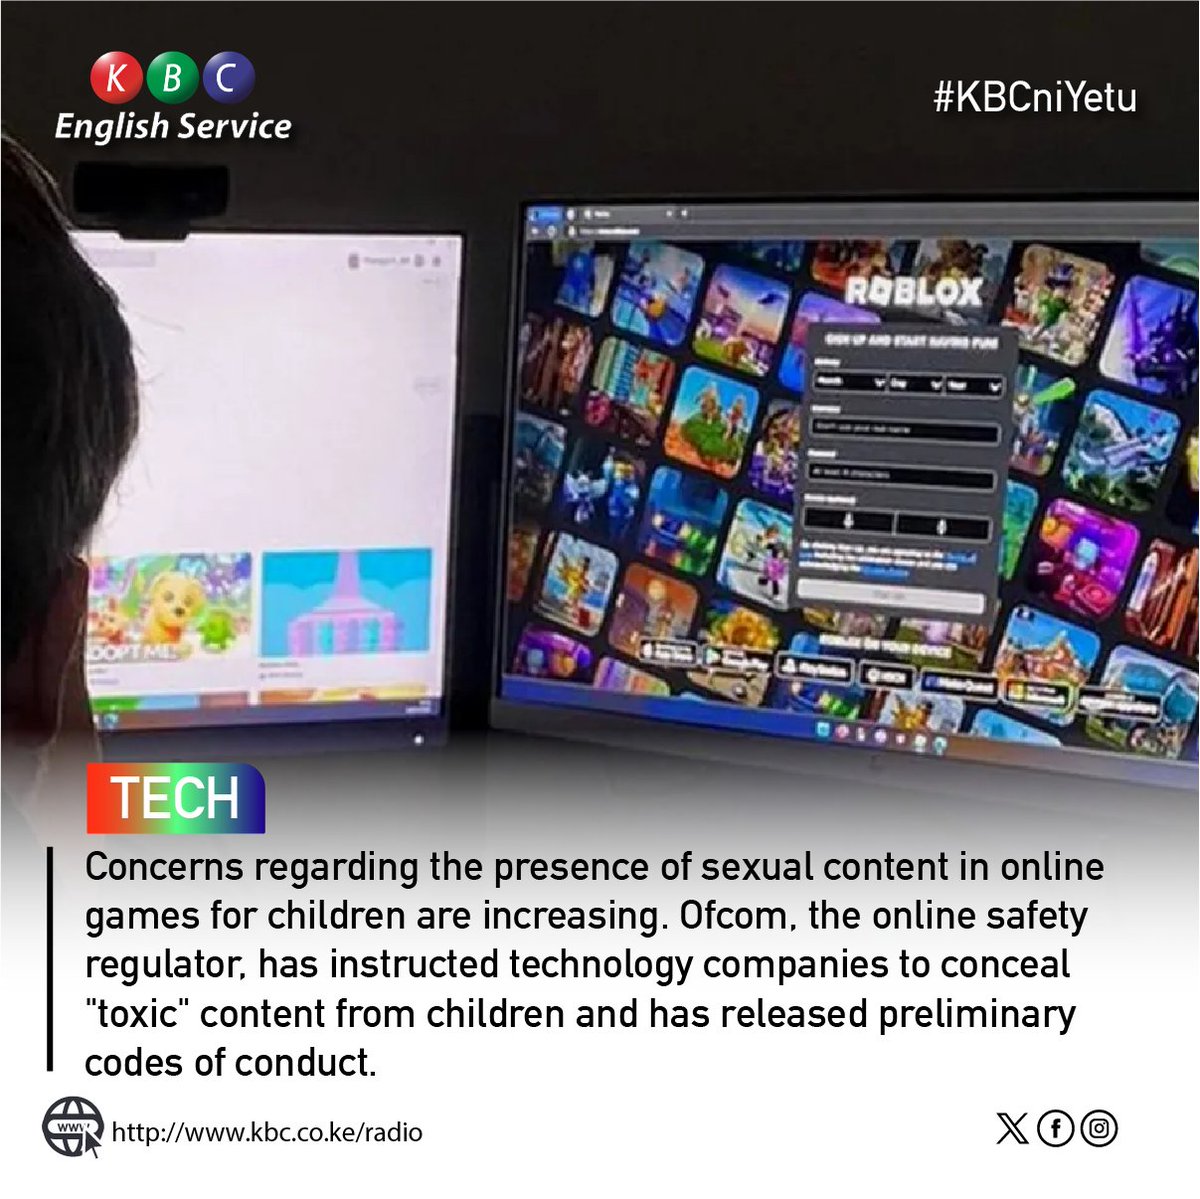 Concerns regarding the presence of sexual content in online games for children are increasing. Ofcom, the online safety regulator, has instructed technology companies to conceal 'toxic' content from children and has released preliminary codes of conduct. ^PMN #KBCEnglishService